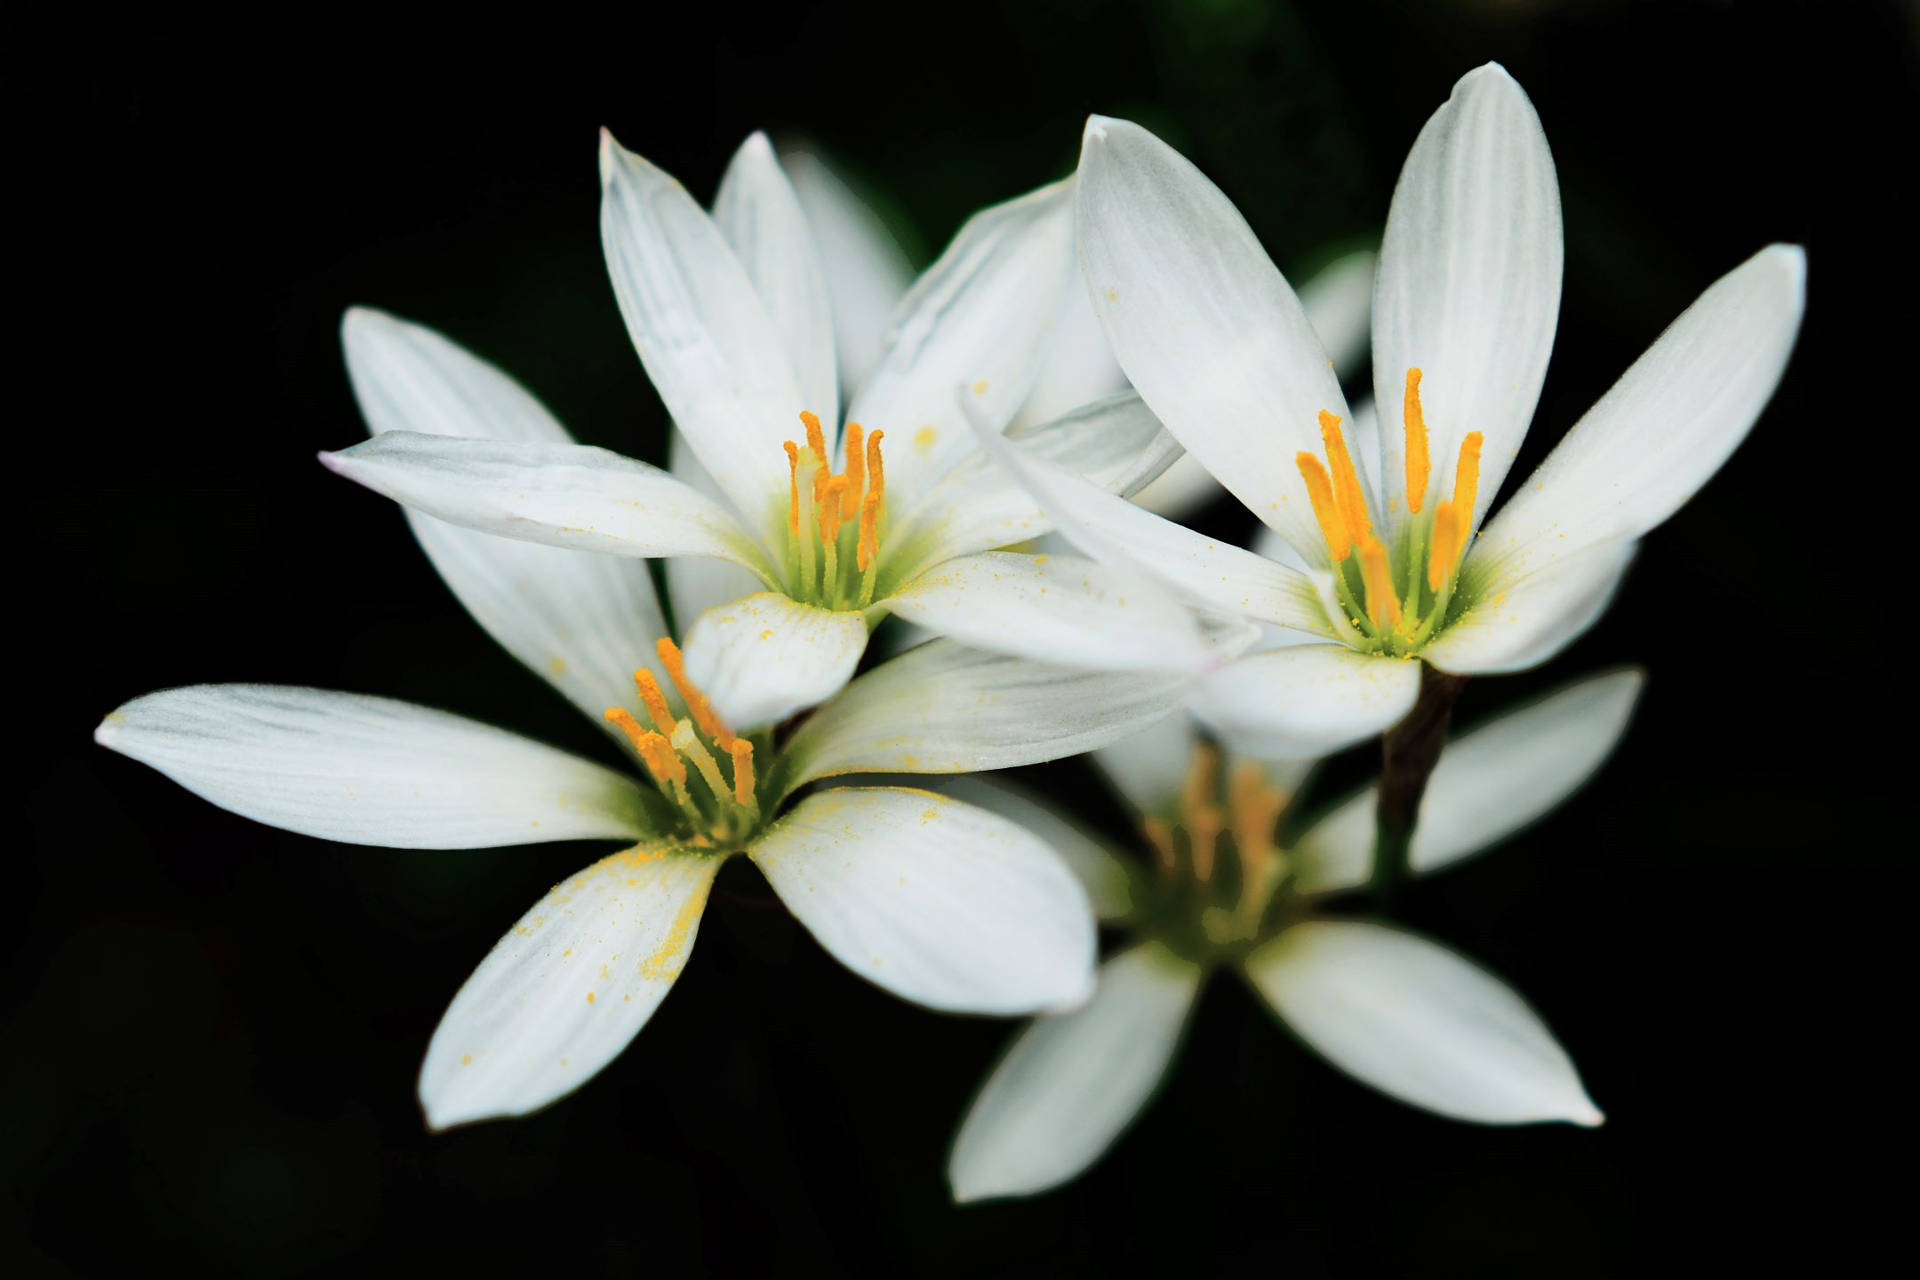 Elegance Embodied: Close-up Of A Zephyr White Lily